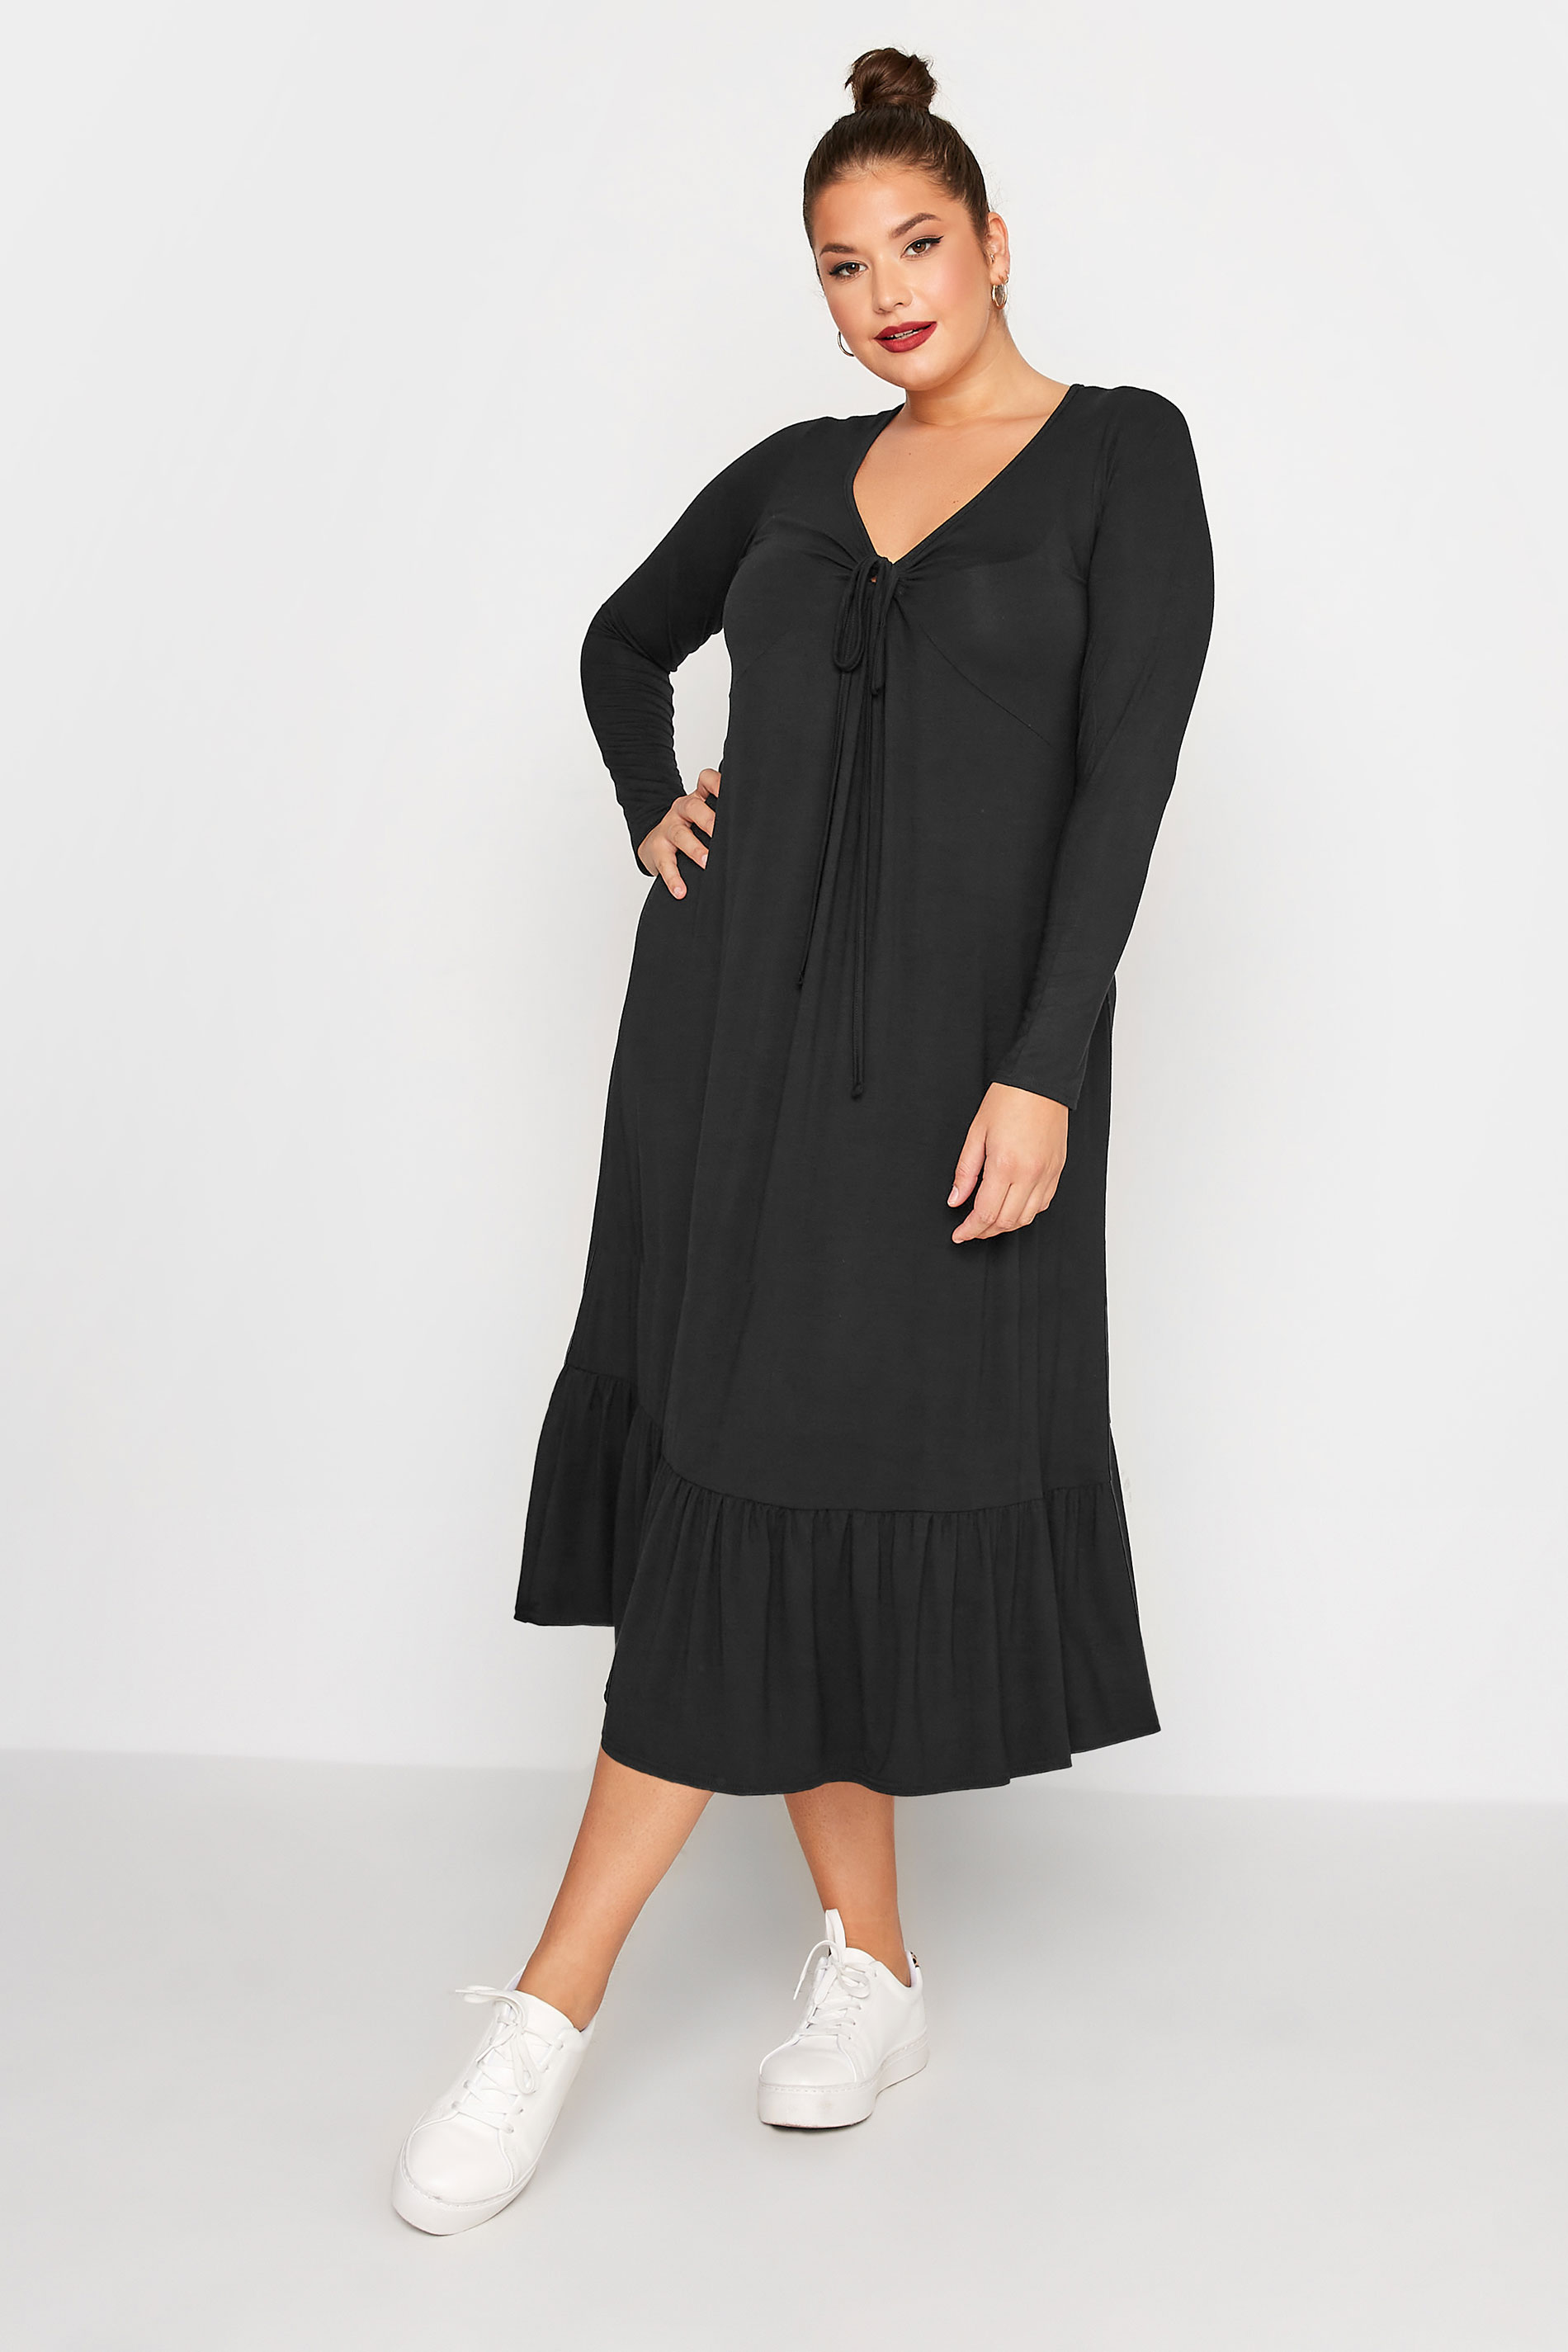 LIMITED COLLECTION Plus Size Black Keyhole Tie Neck Midaxi Dress | Yours Clothing 2